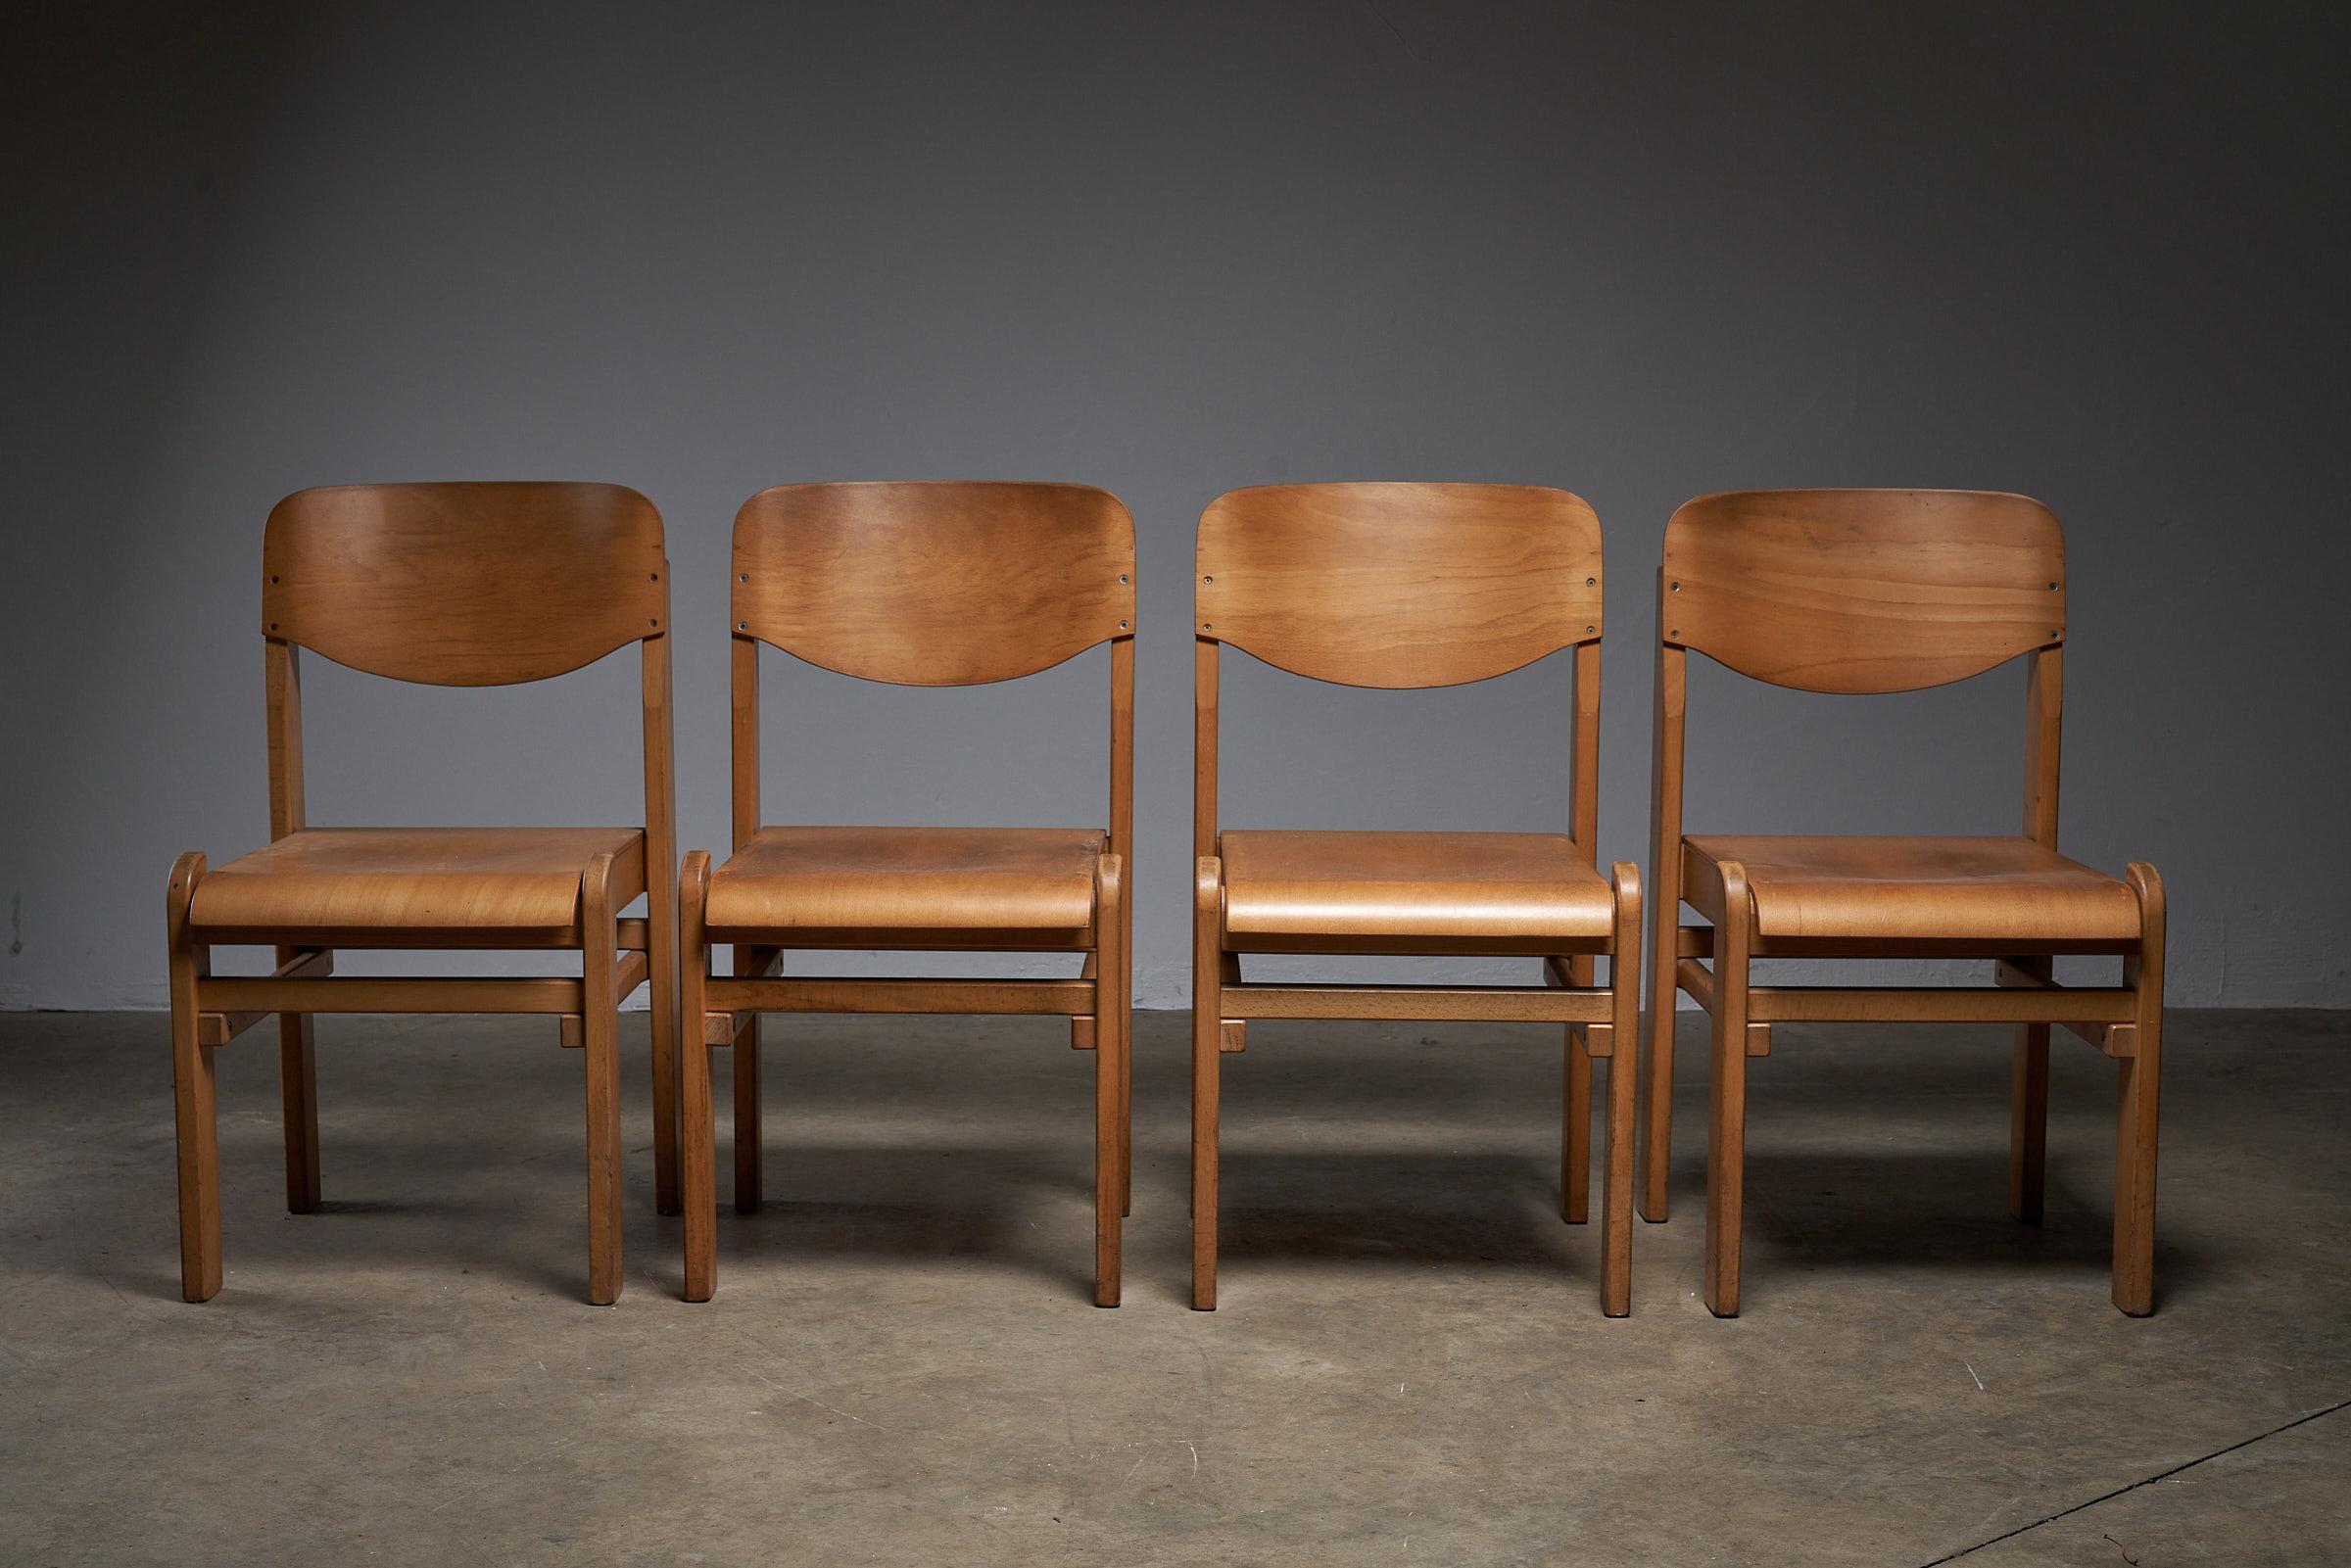 We have a larger quantity of this piece so this makes it perfect if you are searching for multiple pieces. Very sturdy brutalis wooden chairs.